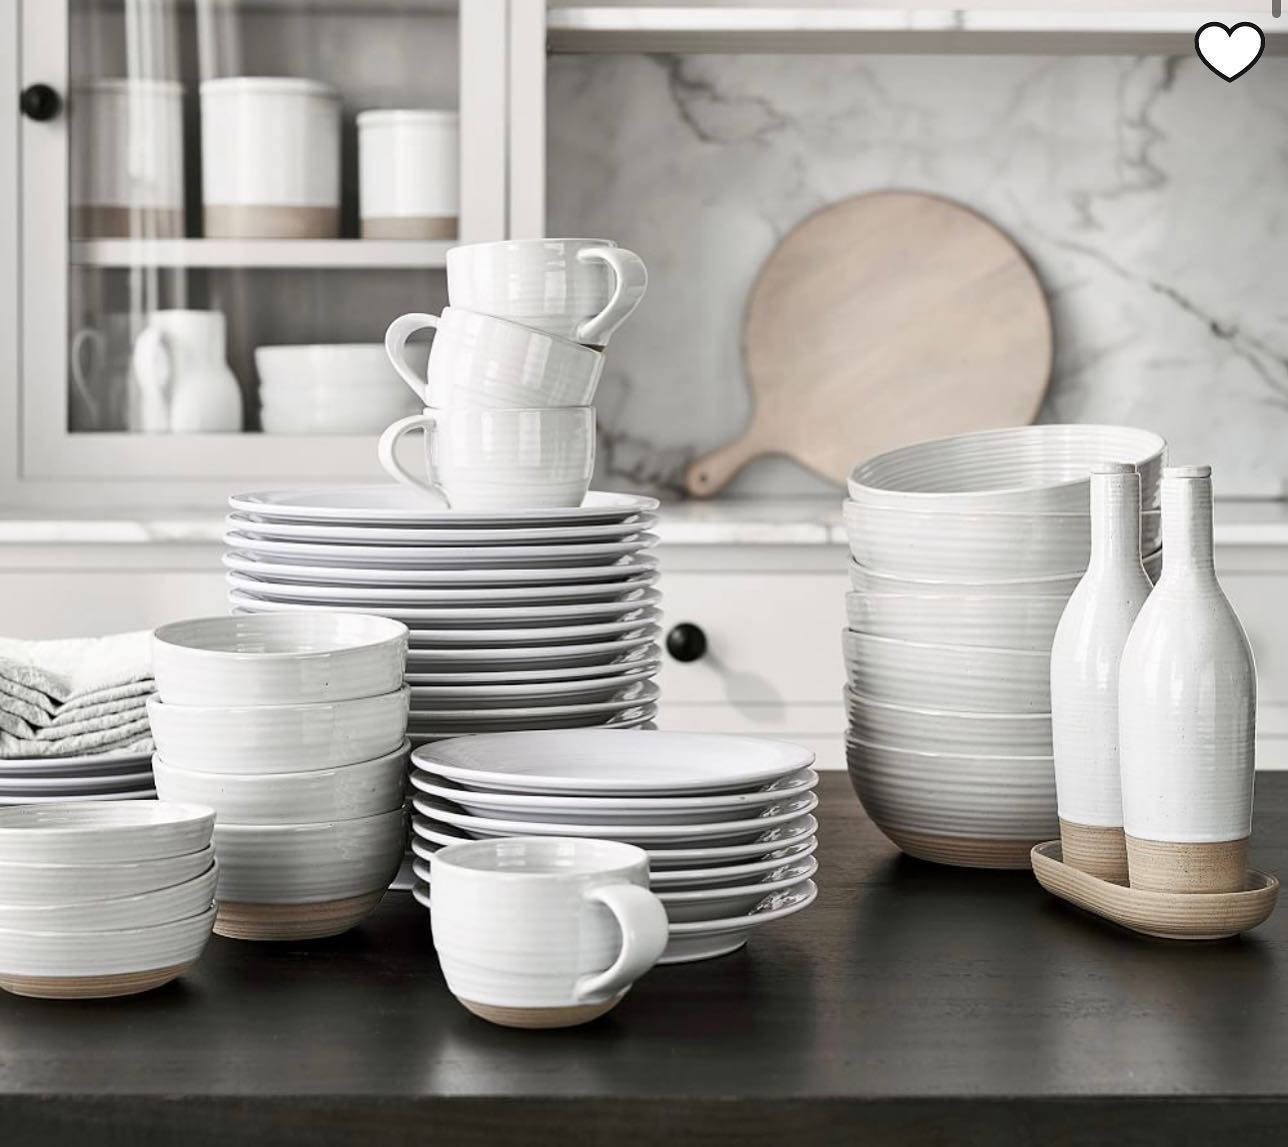 Love this collection from PotteryBarn! 😍 check out the Quinn Handcrafted Stoneware set. (📷: PotteryBarn.com). #potteryba